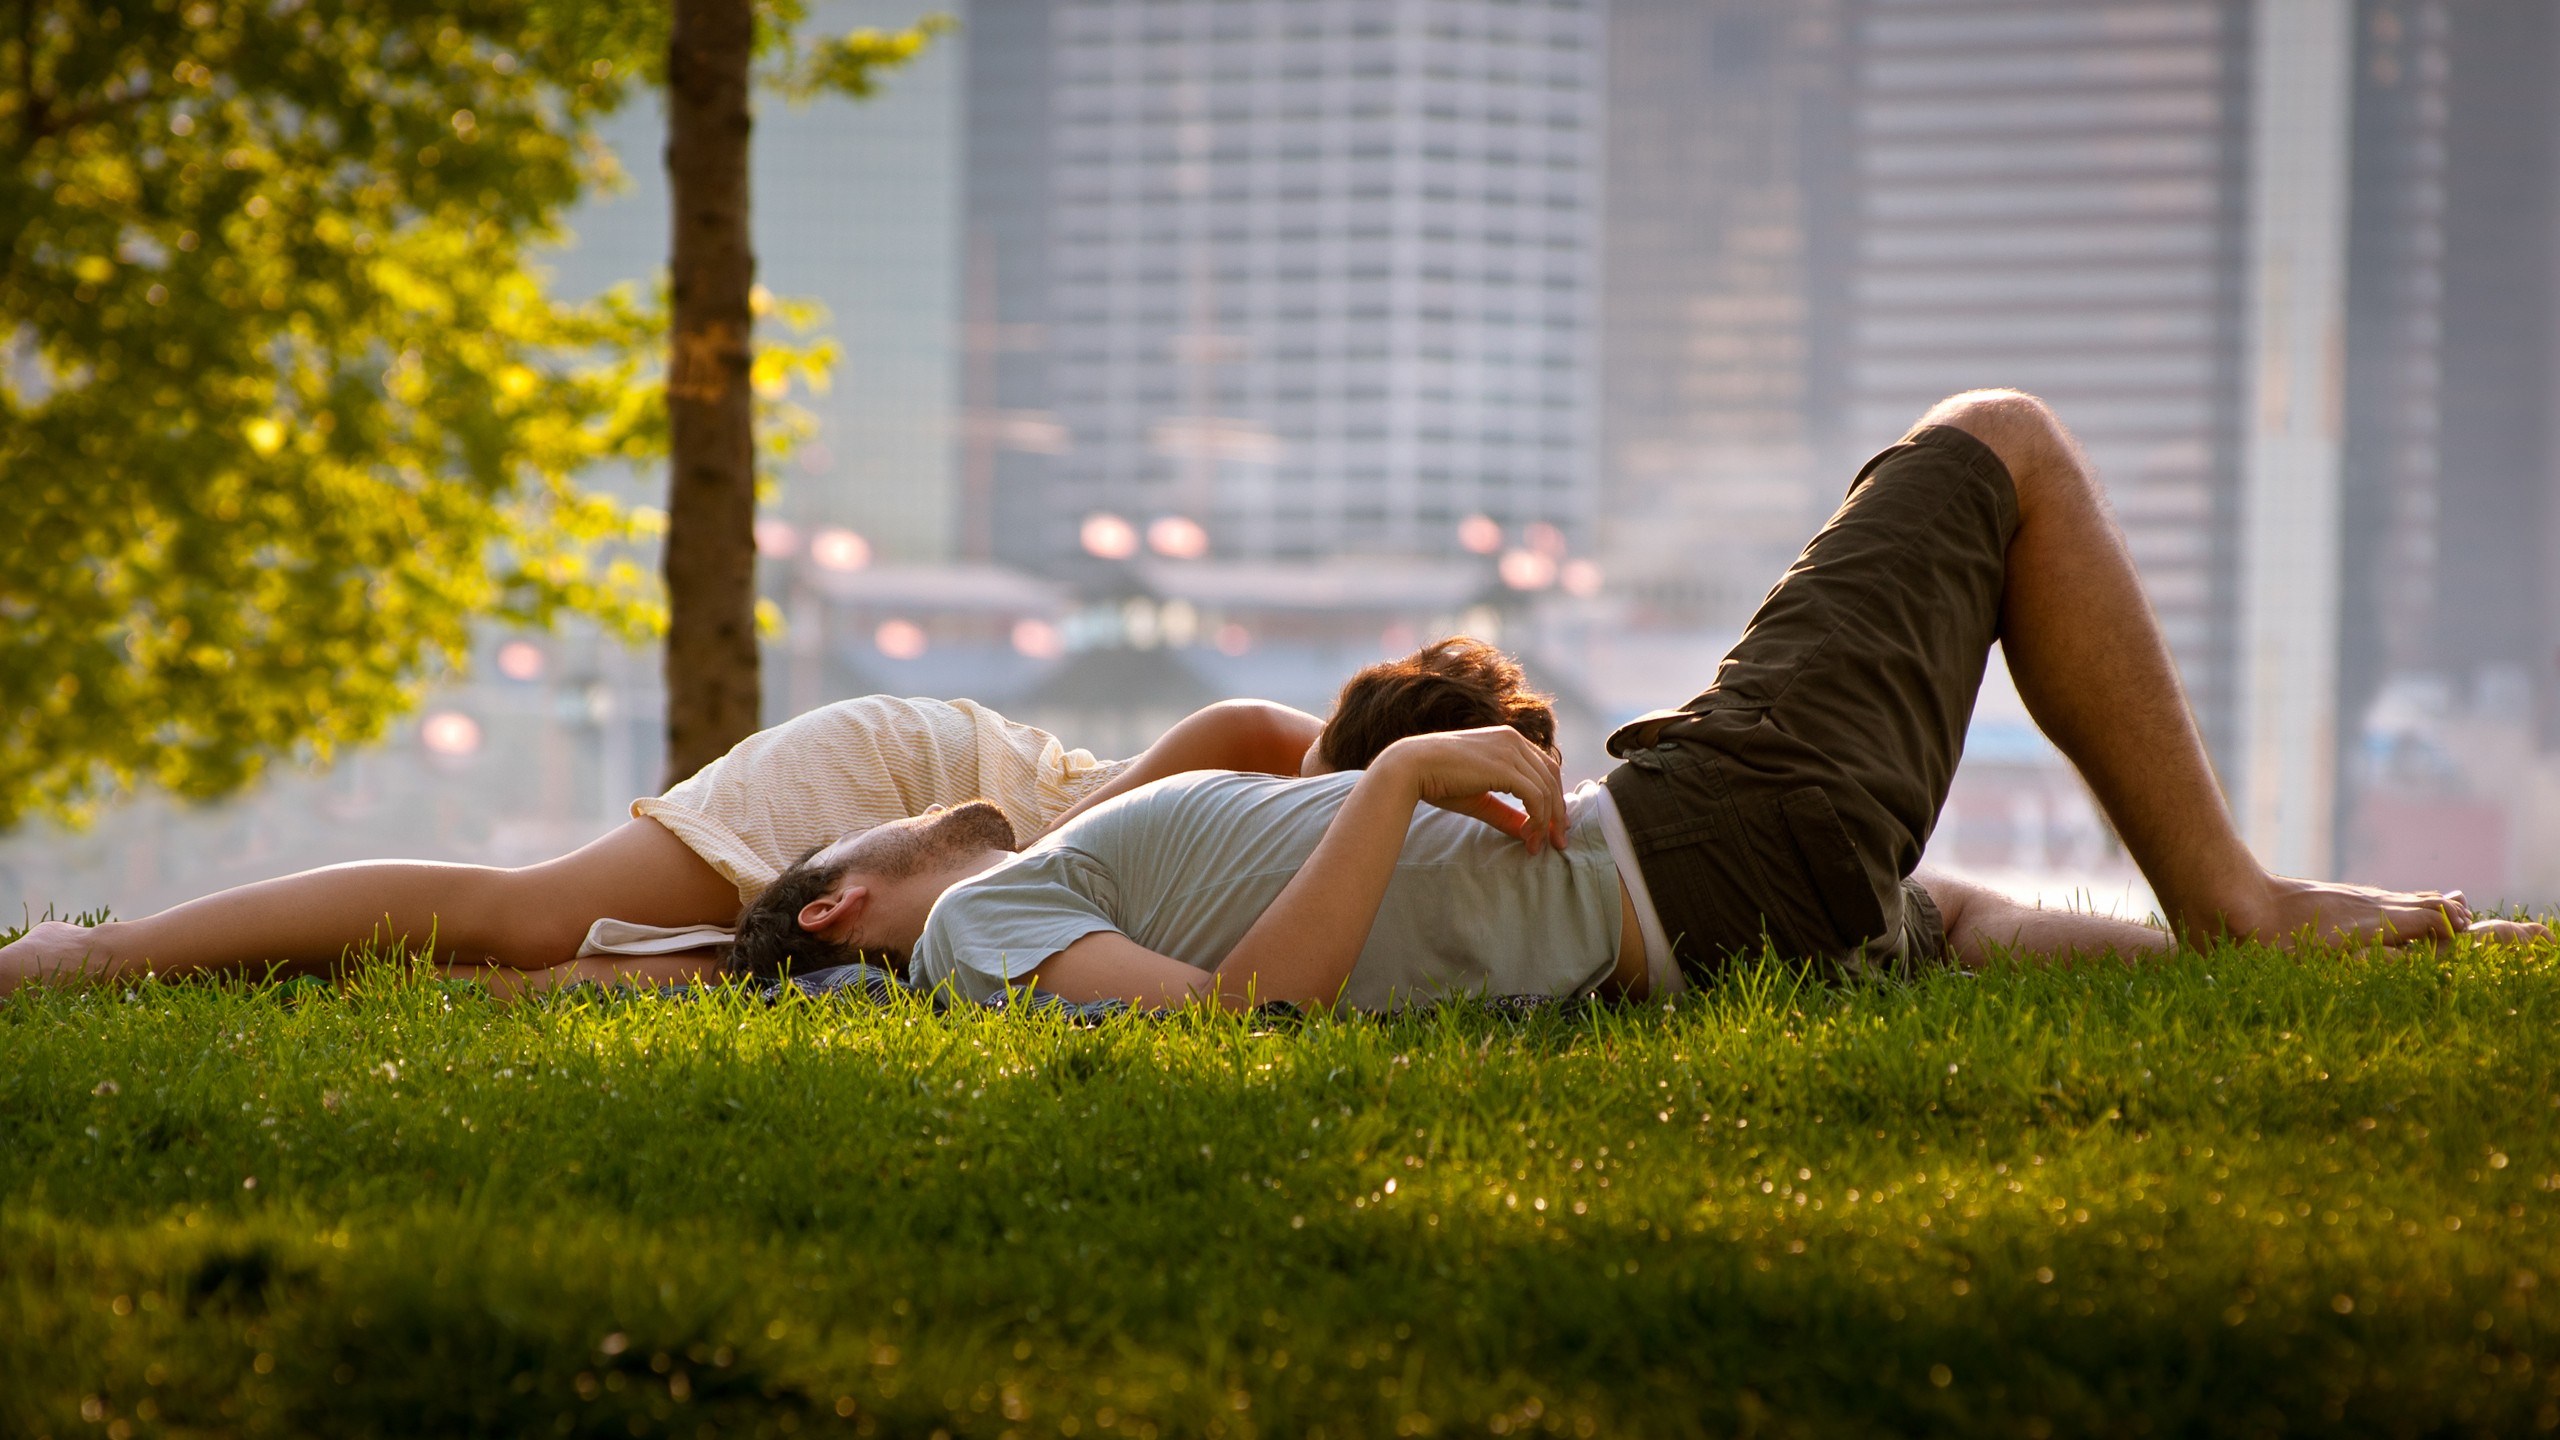 in-love-couple-sitting-on-grass-relaxing-city-park-wide-hd-wallpaper